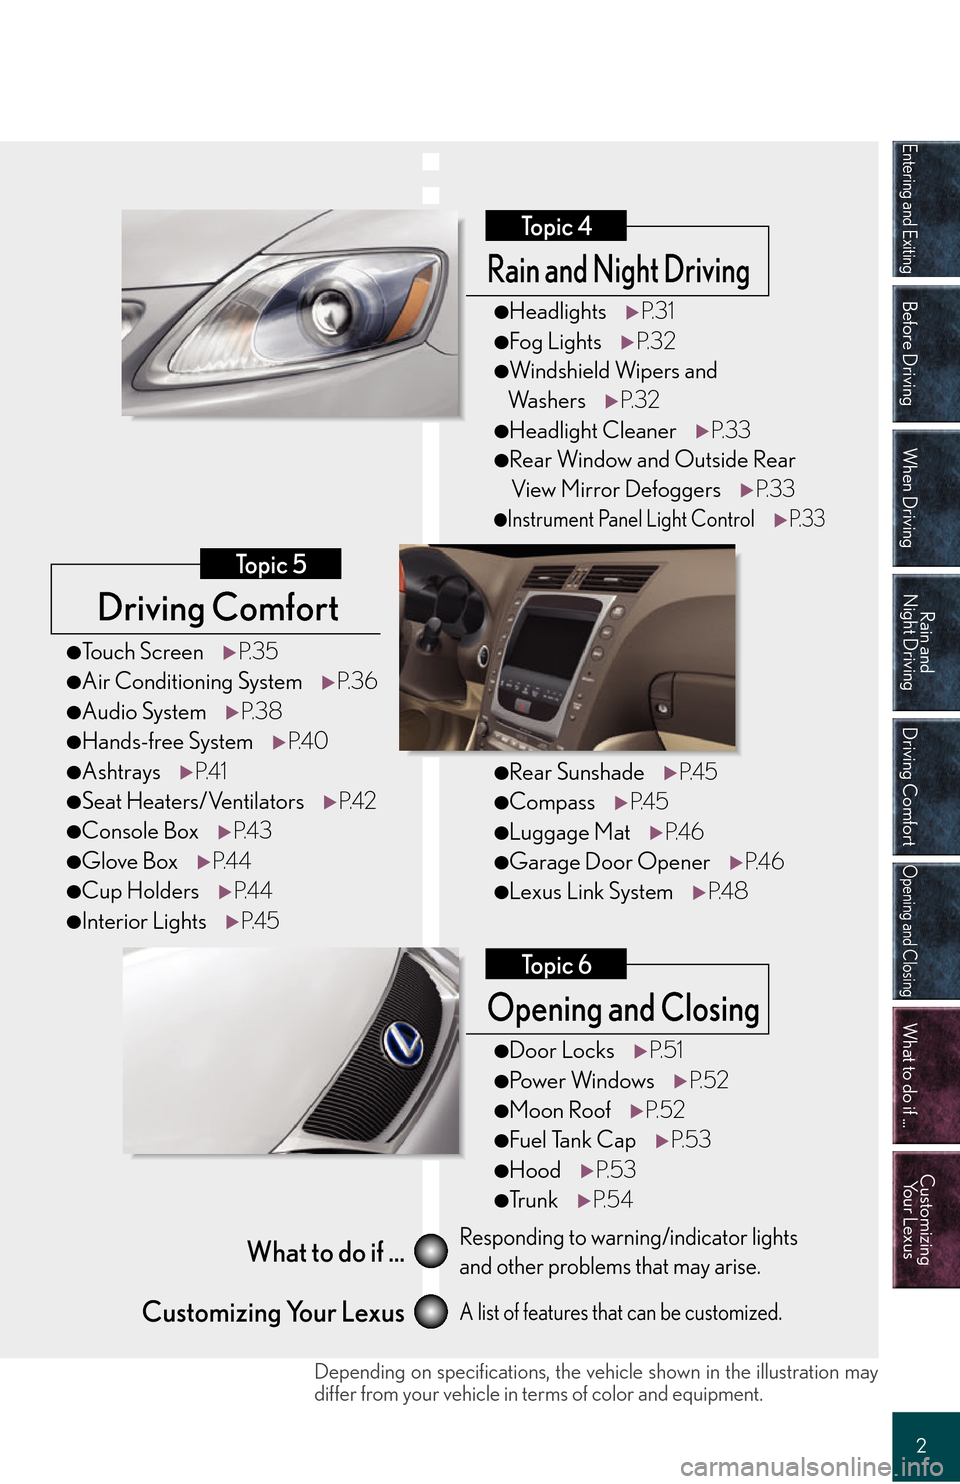 Lexus GS450h 2008  Using other driving systems / LEXUS 2008 GS450H QUICK GUIDE OWNERS MANUAL (OM30B13U) Entering and Exiting
Before Driving
When Driving
Rain and 
Night Driving
Driving Comfort
Opening and Closing
What to do if ...
Customizing Yo u r  L e x u s
2
Driving Comfort
Topic 5
Opening and Closi